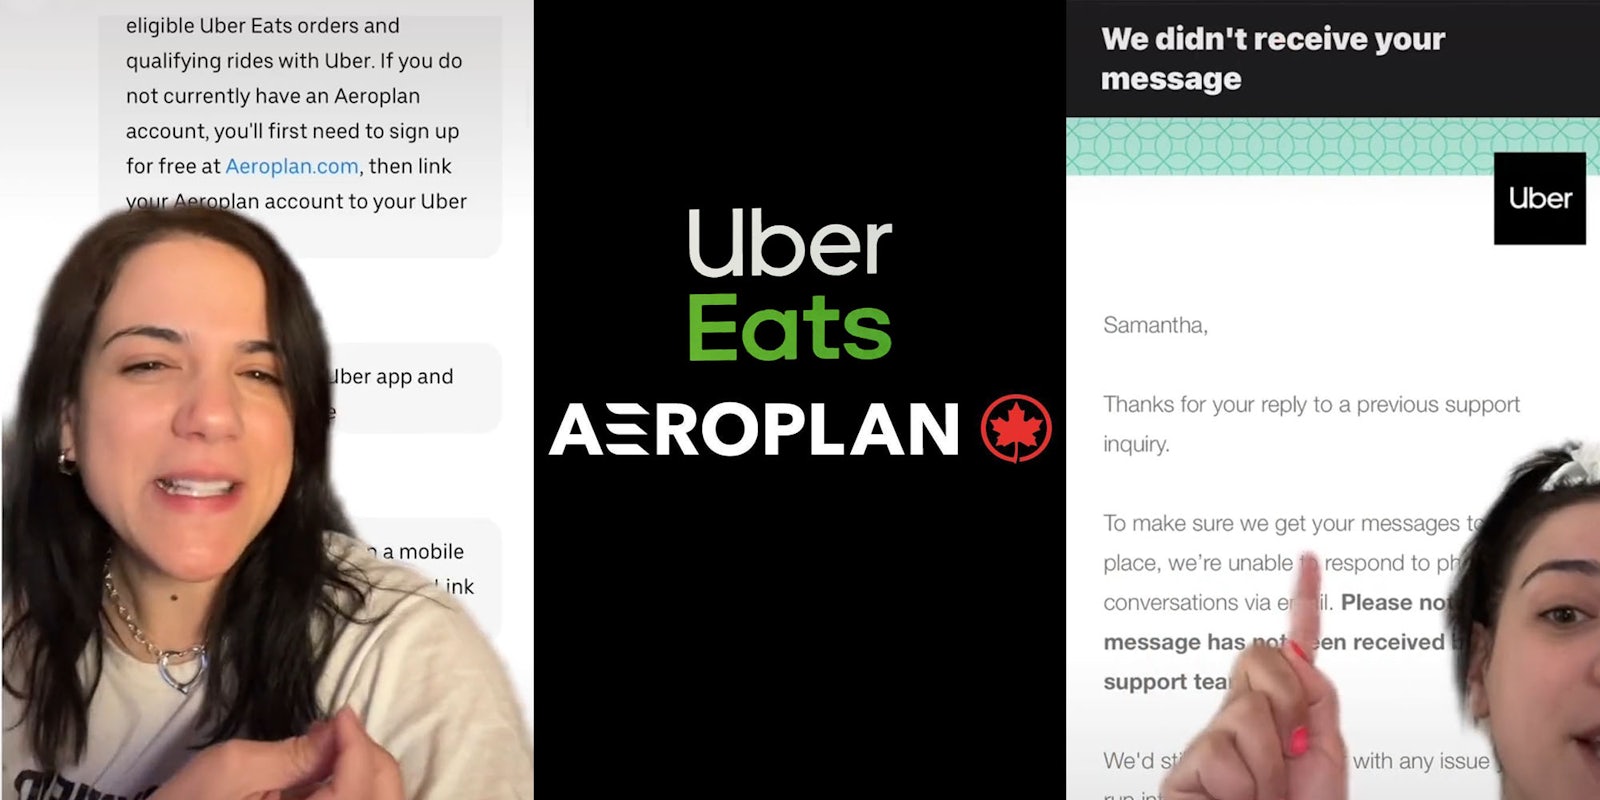 Woman greenscreen tiktok over messages 'eligible Uber eats orders and qualifying rides with ube. If you do not currently have an Aeroplan account, you'll first need to sign up for free at Aeroplan.com, then link your aeroplan account to your uber' (l) Uber Eats and Aeroplan logo on black background (c) Woman greenscreen over email 'Samantha, Thanks for your reply to a previous support inquiry. To make sure we get your messages to place, we're unable to respond to conversations via email. Please note message has not been recieved support tea' (r)